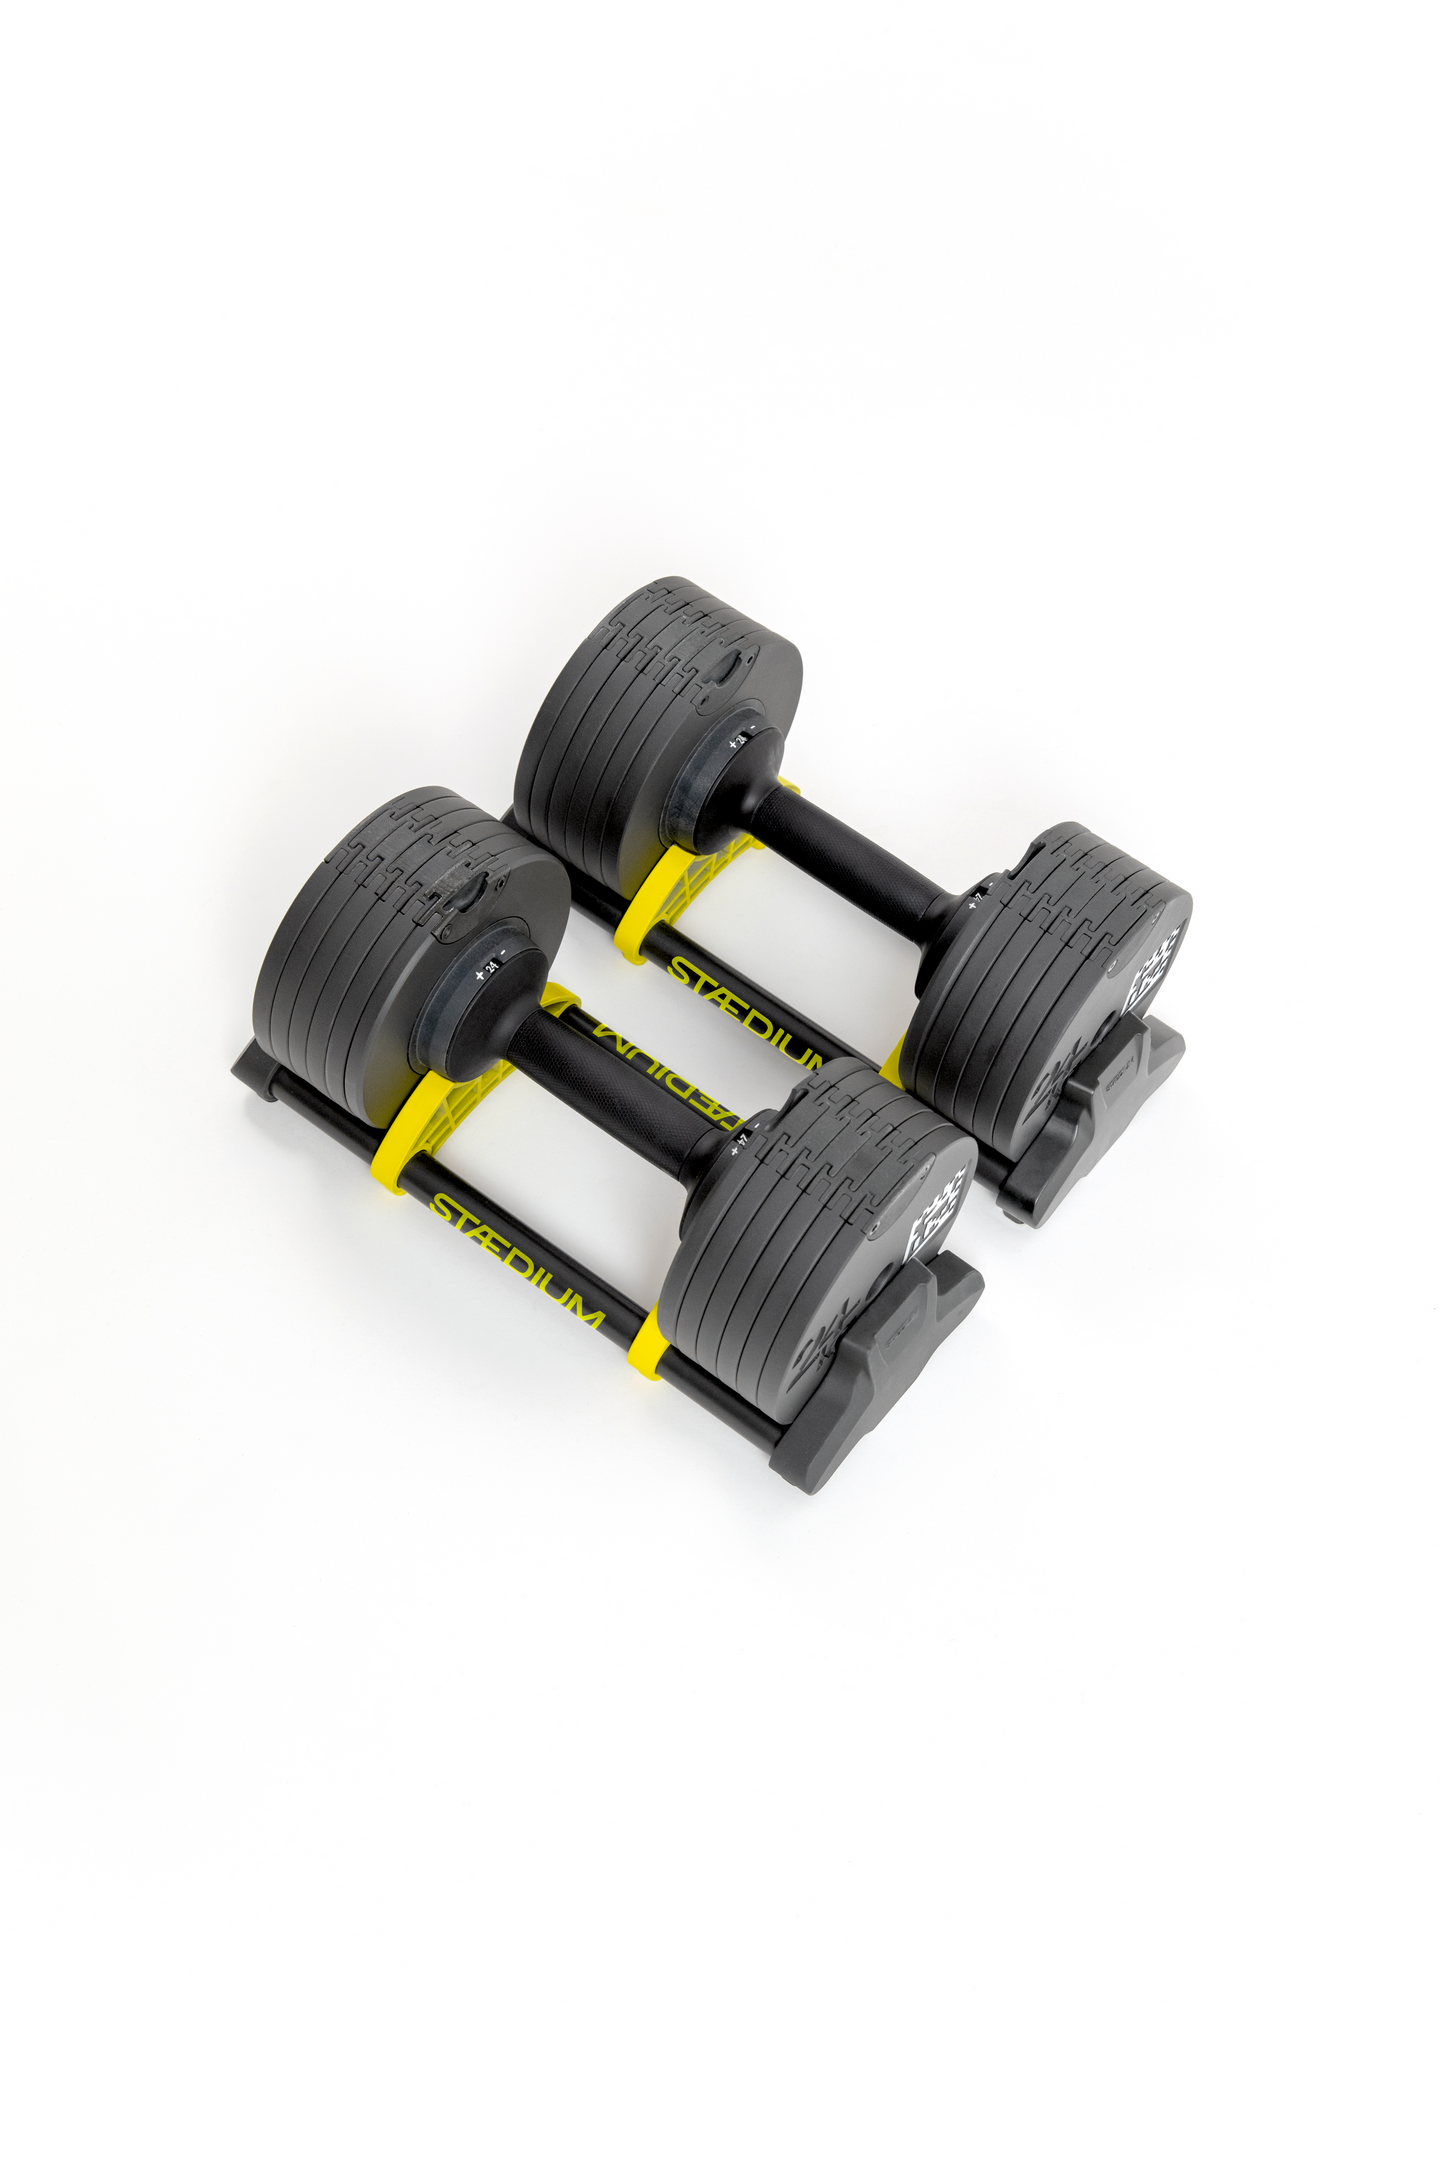 Adjustable Dumbbells by Freeletics - The Perfect Home Workout Equipment